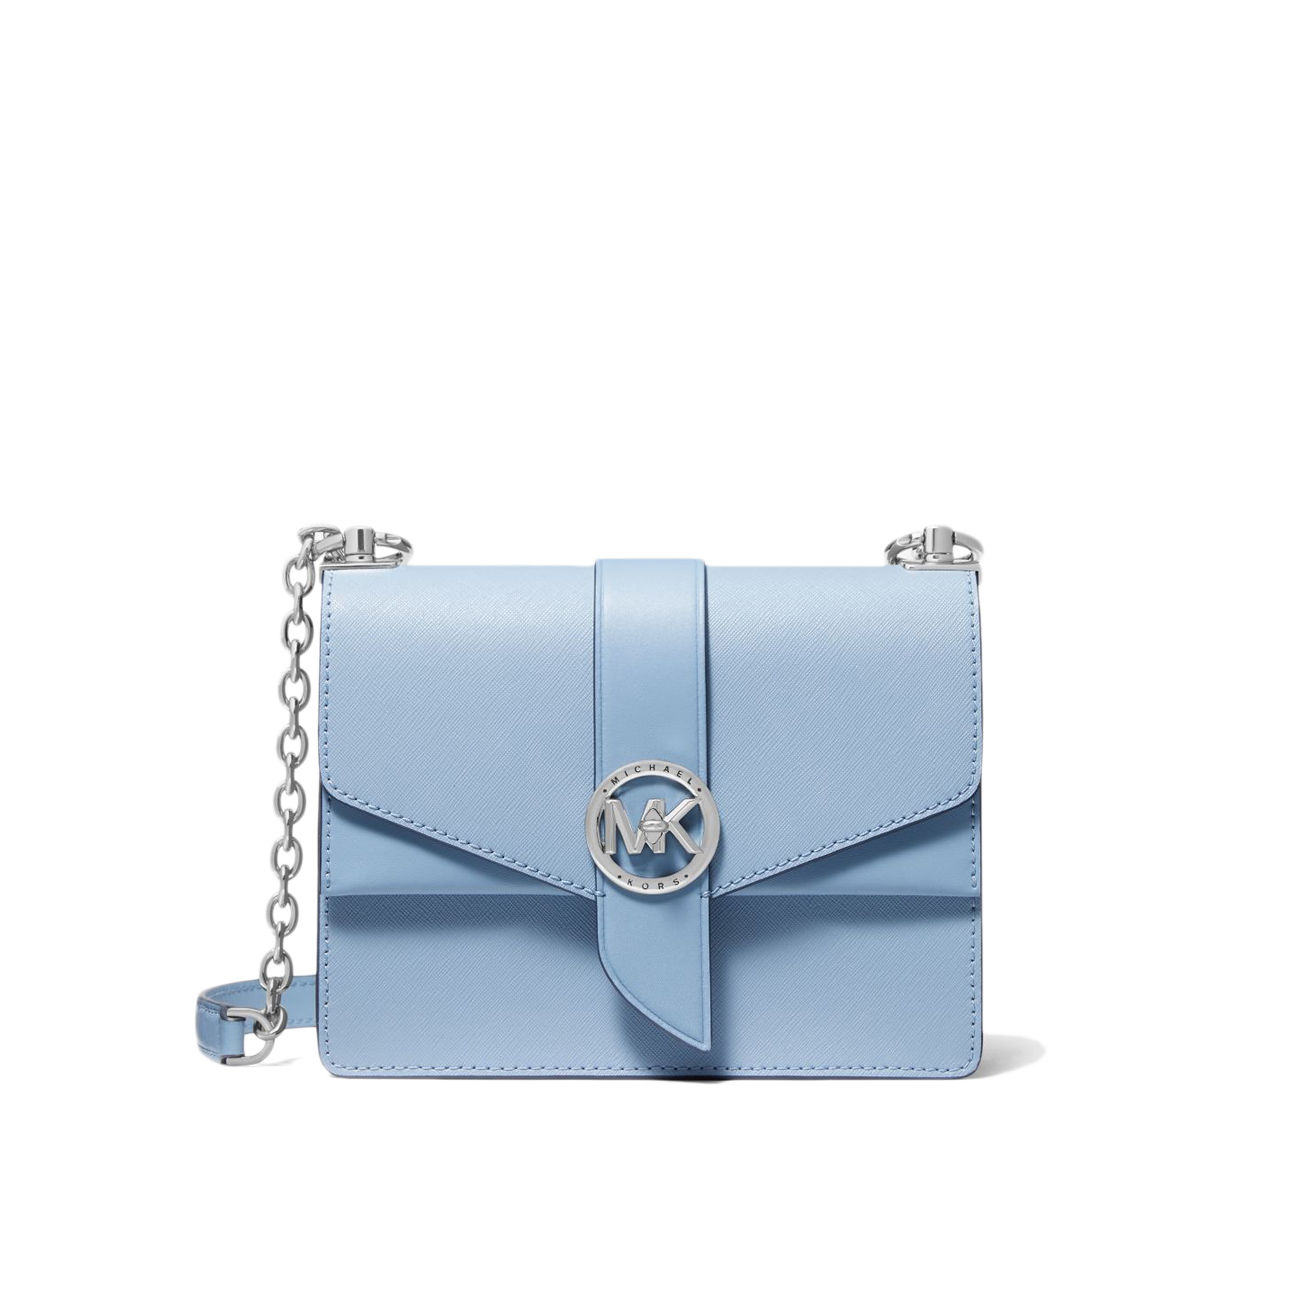 MICHAEL Michael Kors Greenwich Small Leather Cross-body Bag in